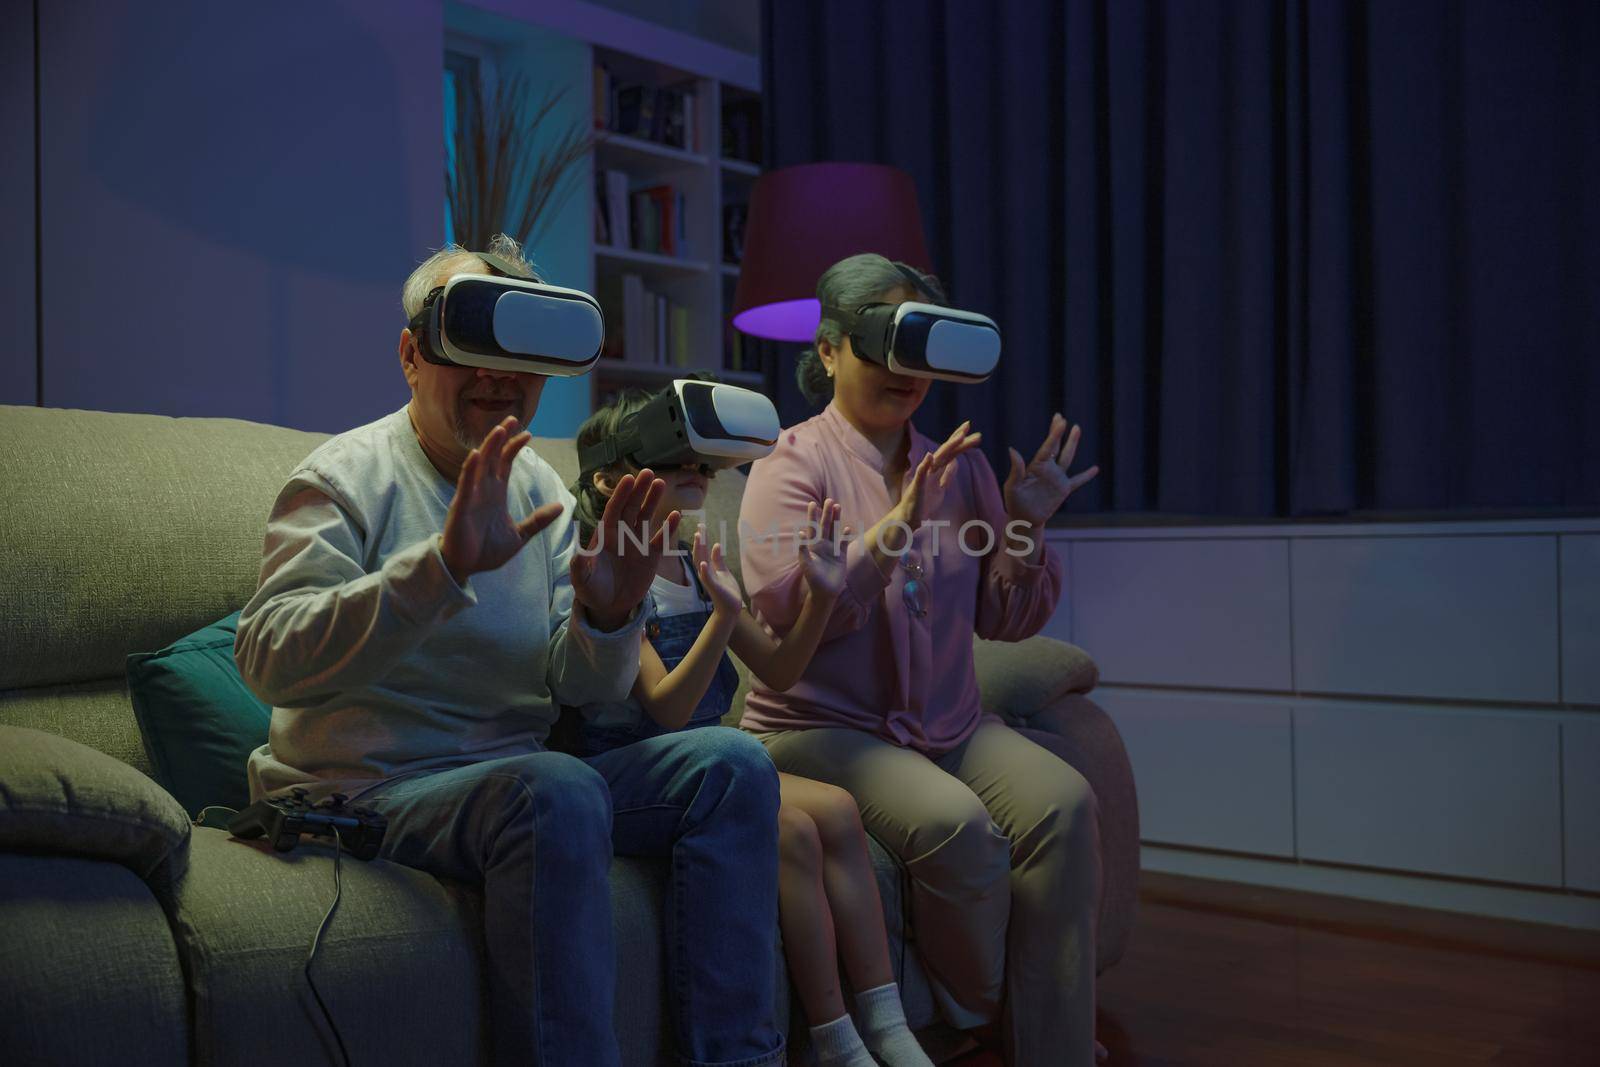 granddaughter and grandparents playing together exciting interesting video games using virtual reality headsets by Sorapop